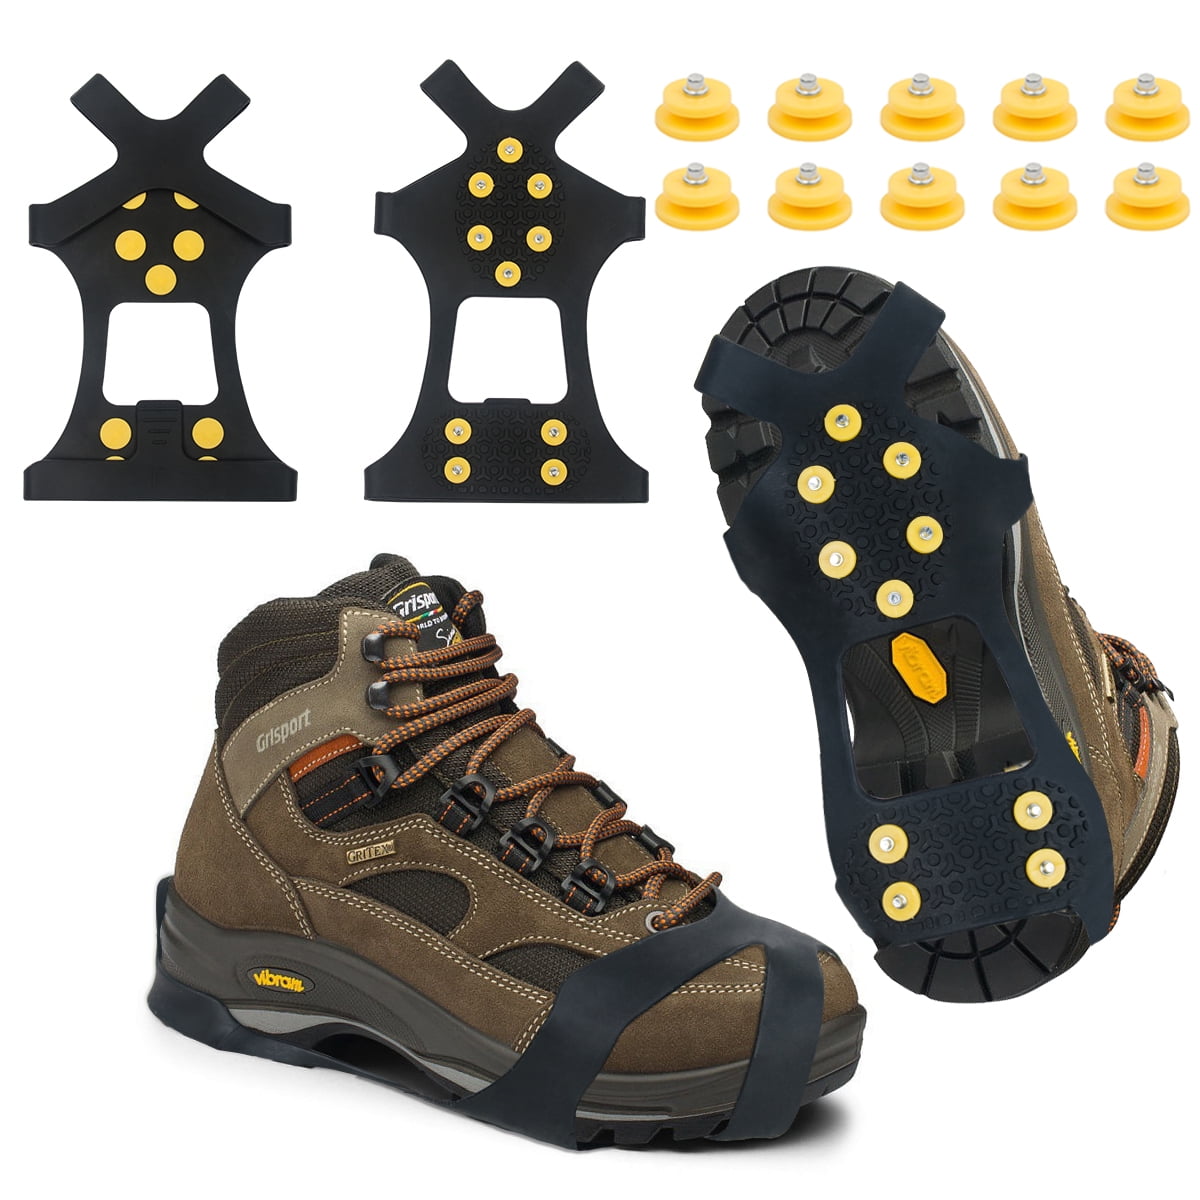 Stud Crampons Spikes Walk Traction Cleats Shoe Boot Cover Ice Snow Grips KIts 